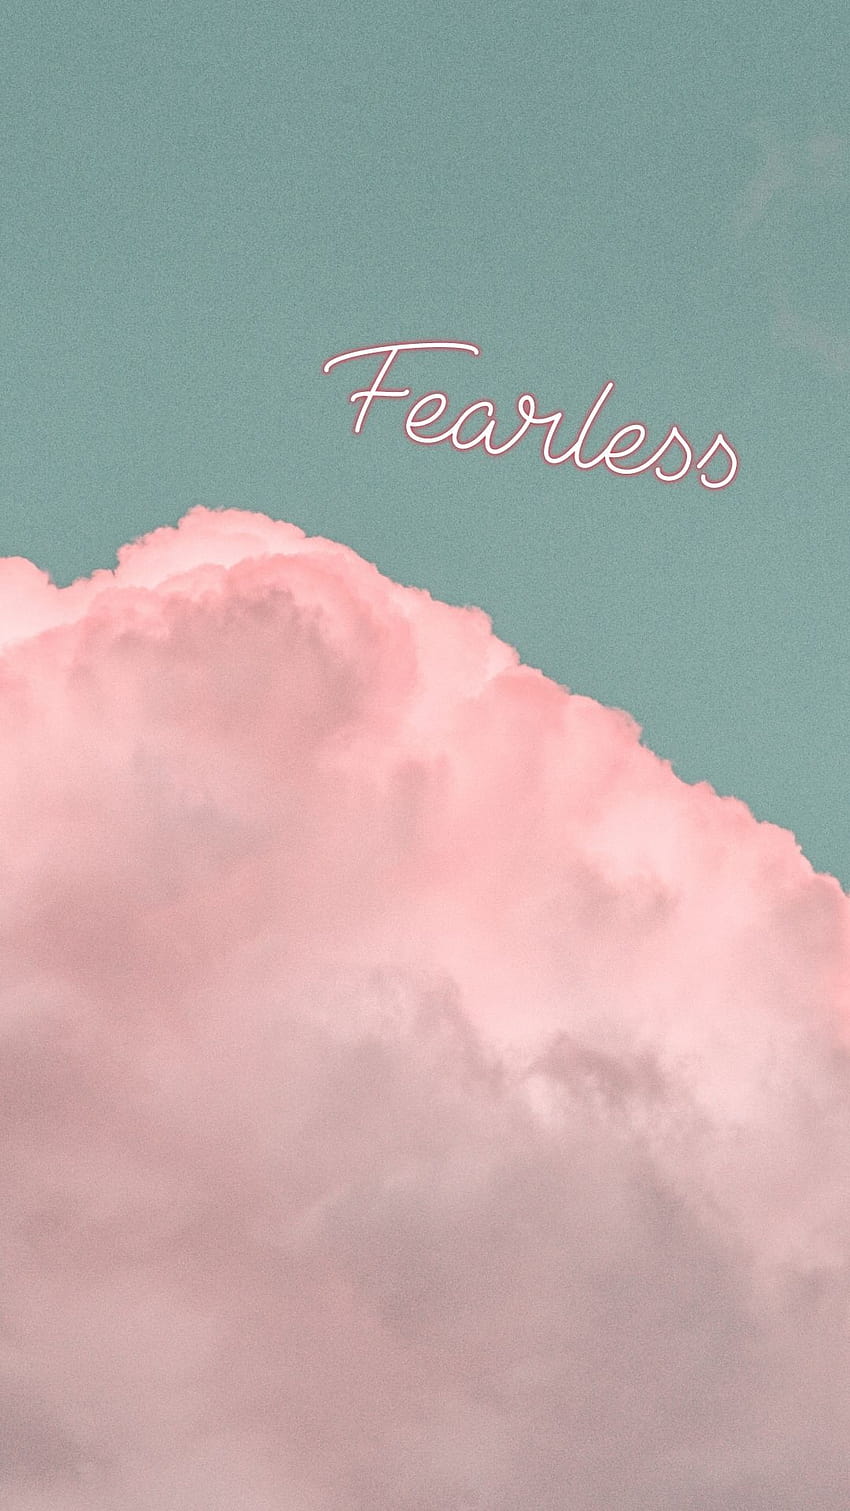 12 Positive Quote For Phone To Brighten Up Your Days, fearless quotes mobile HD phone wallpaper